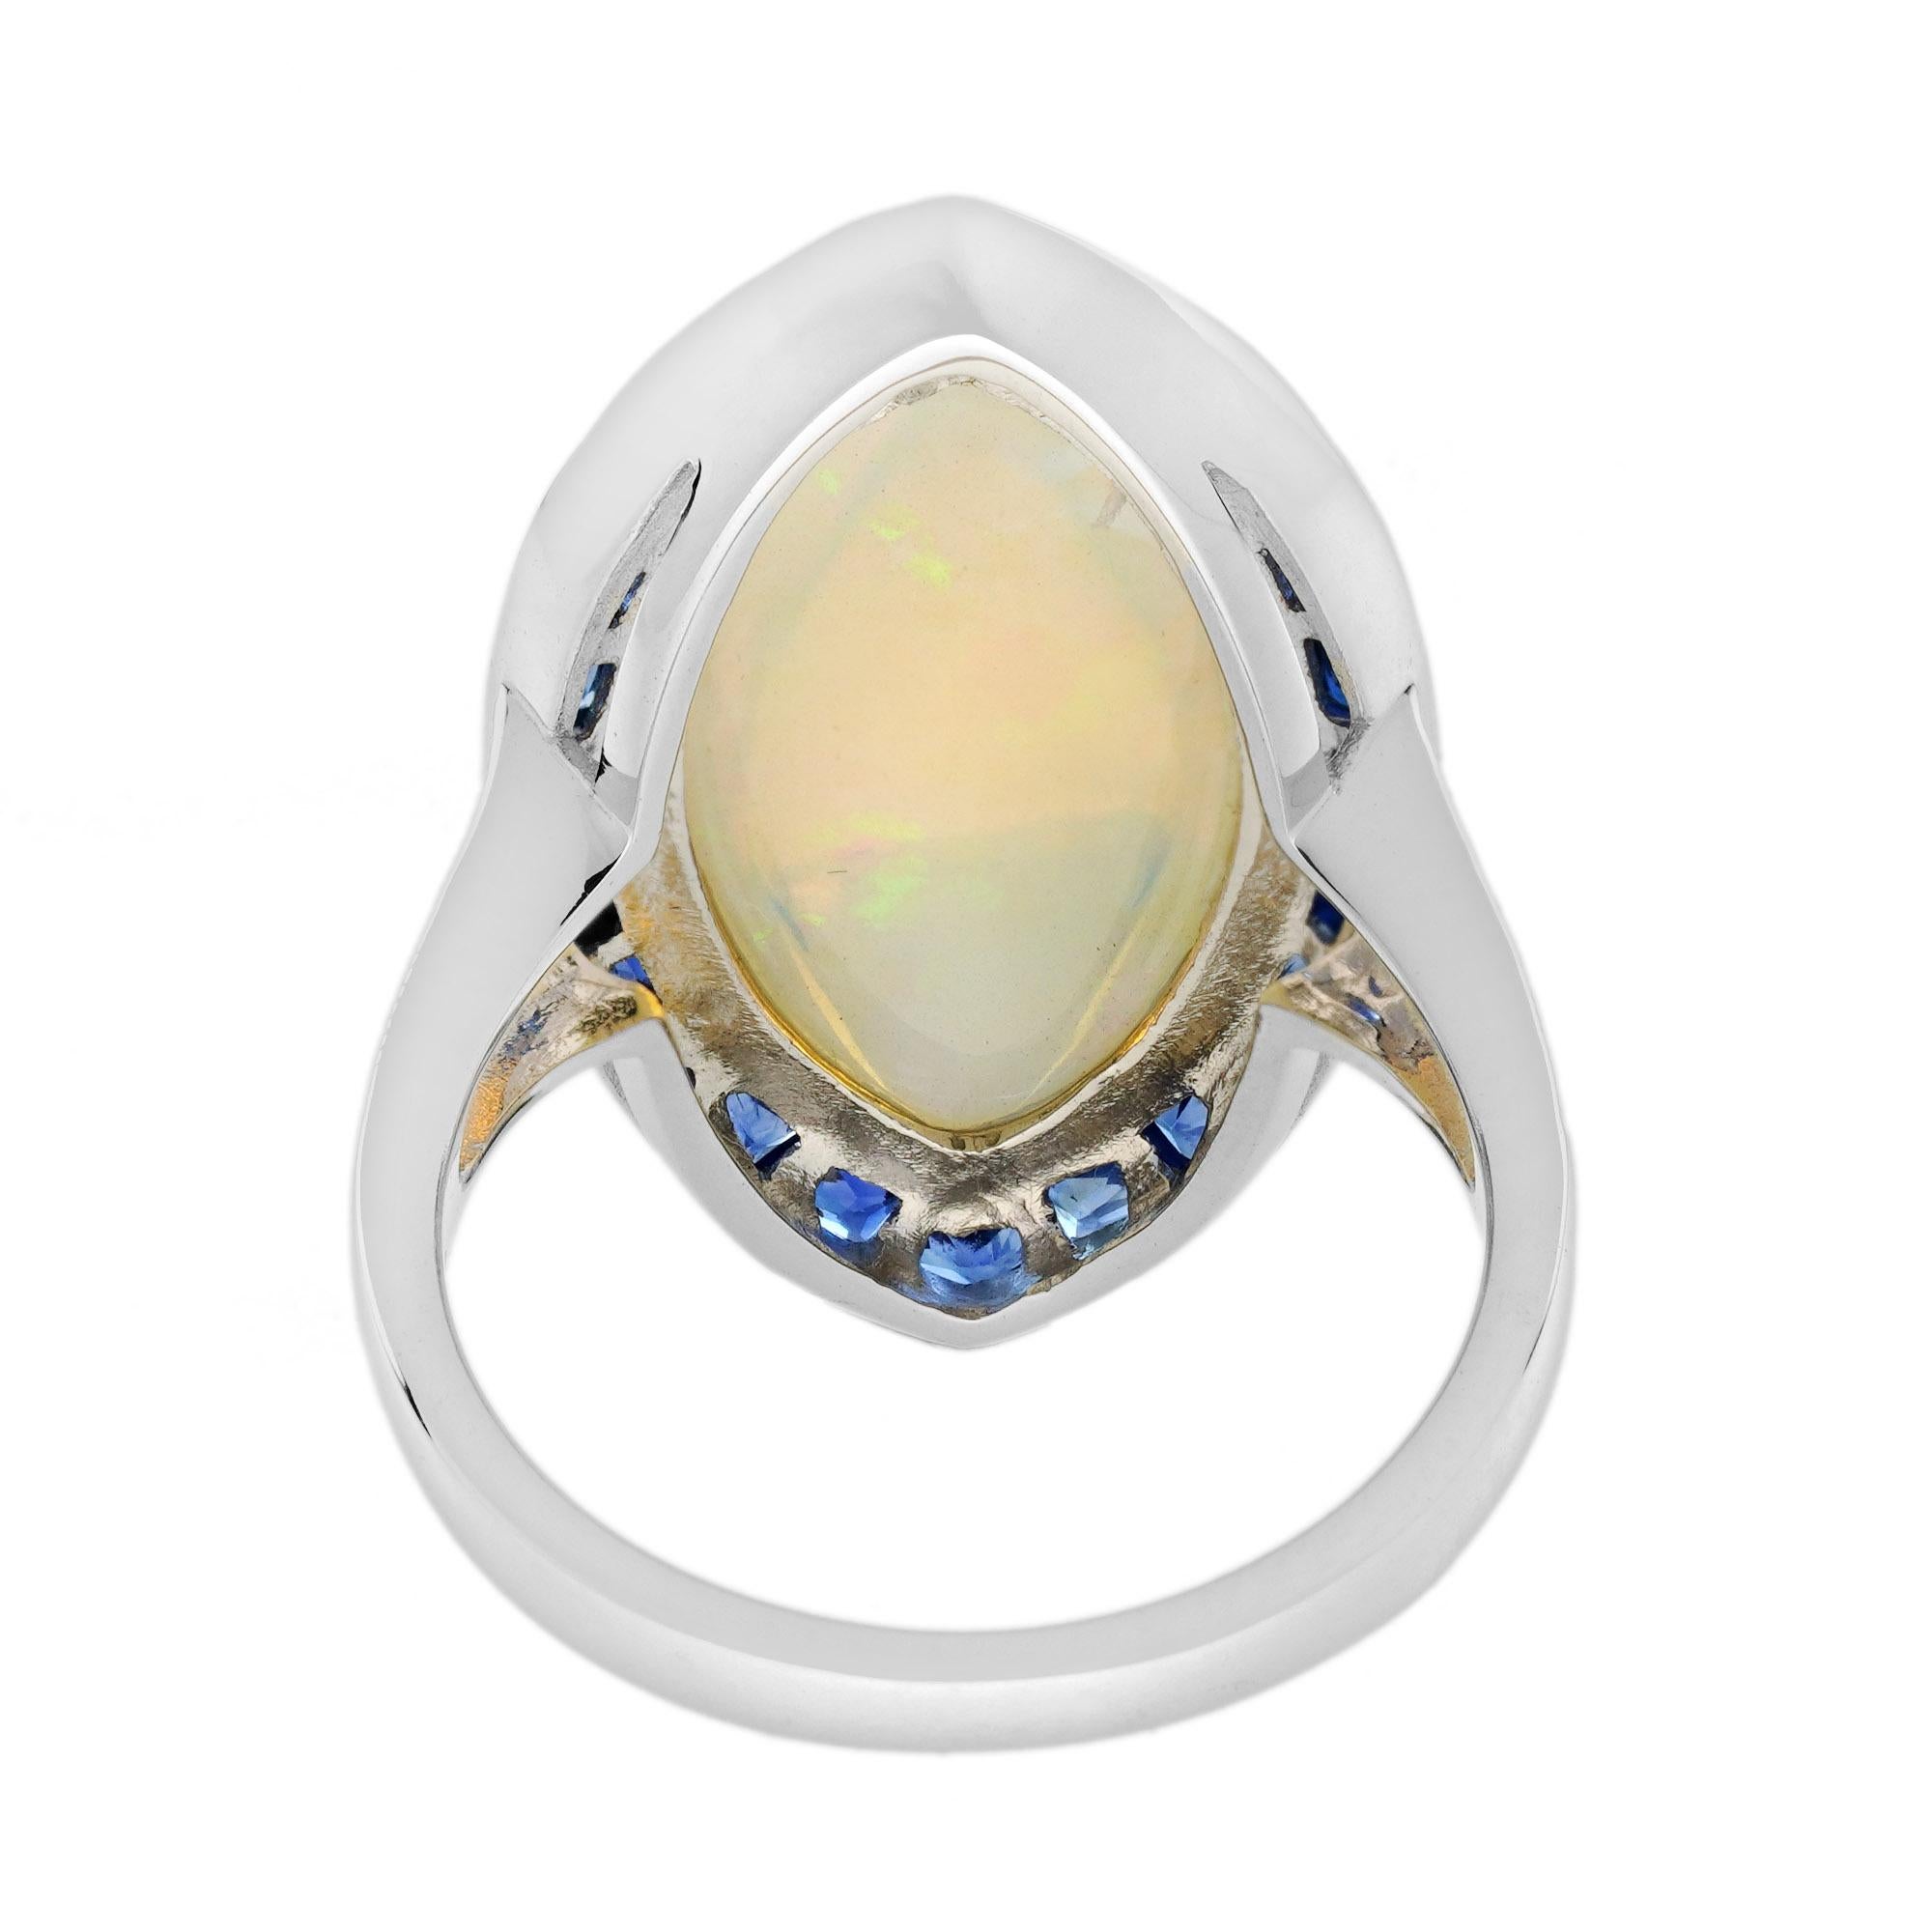 6.55 Ct. Opal Blue Sapphire Diamond Art Deco Style Cocktail Ring in 18K Gold 2